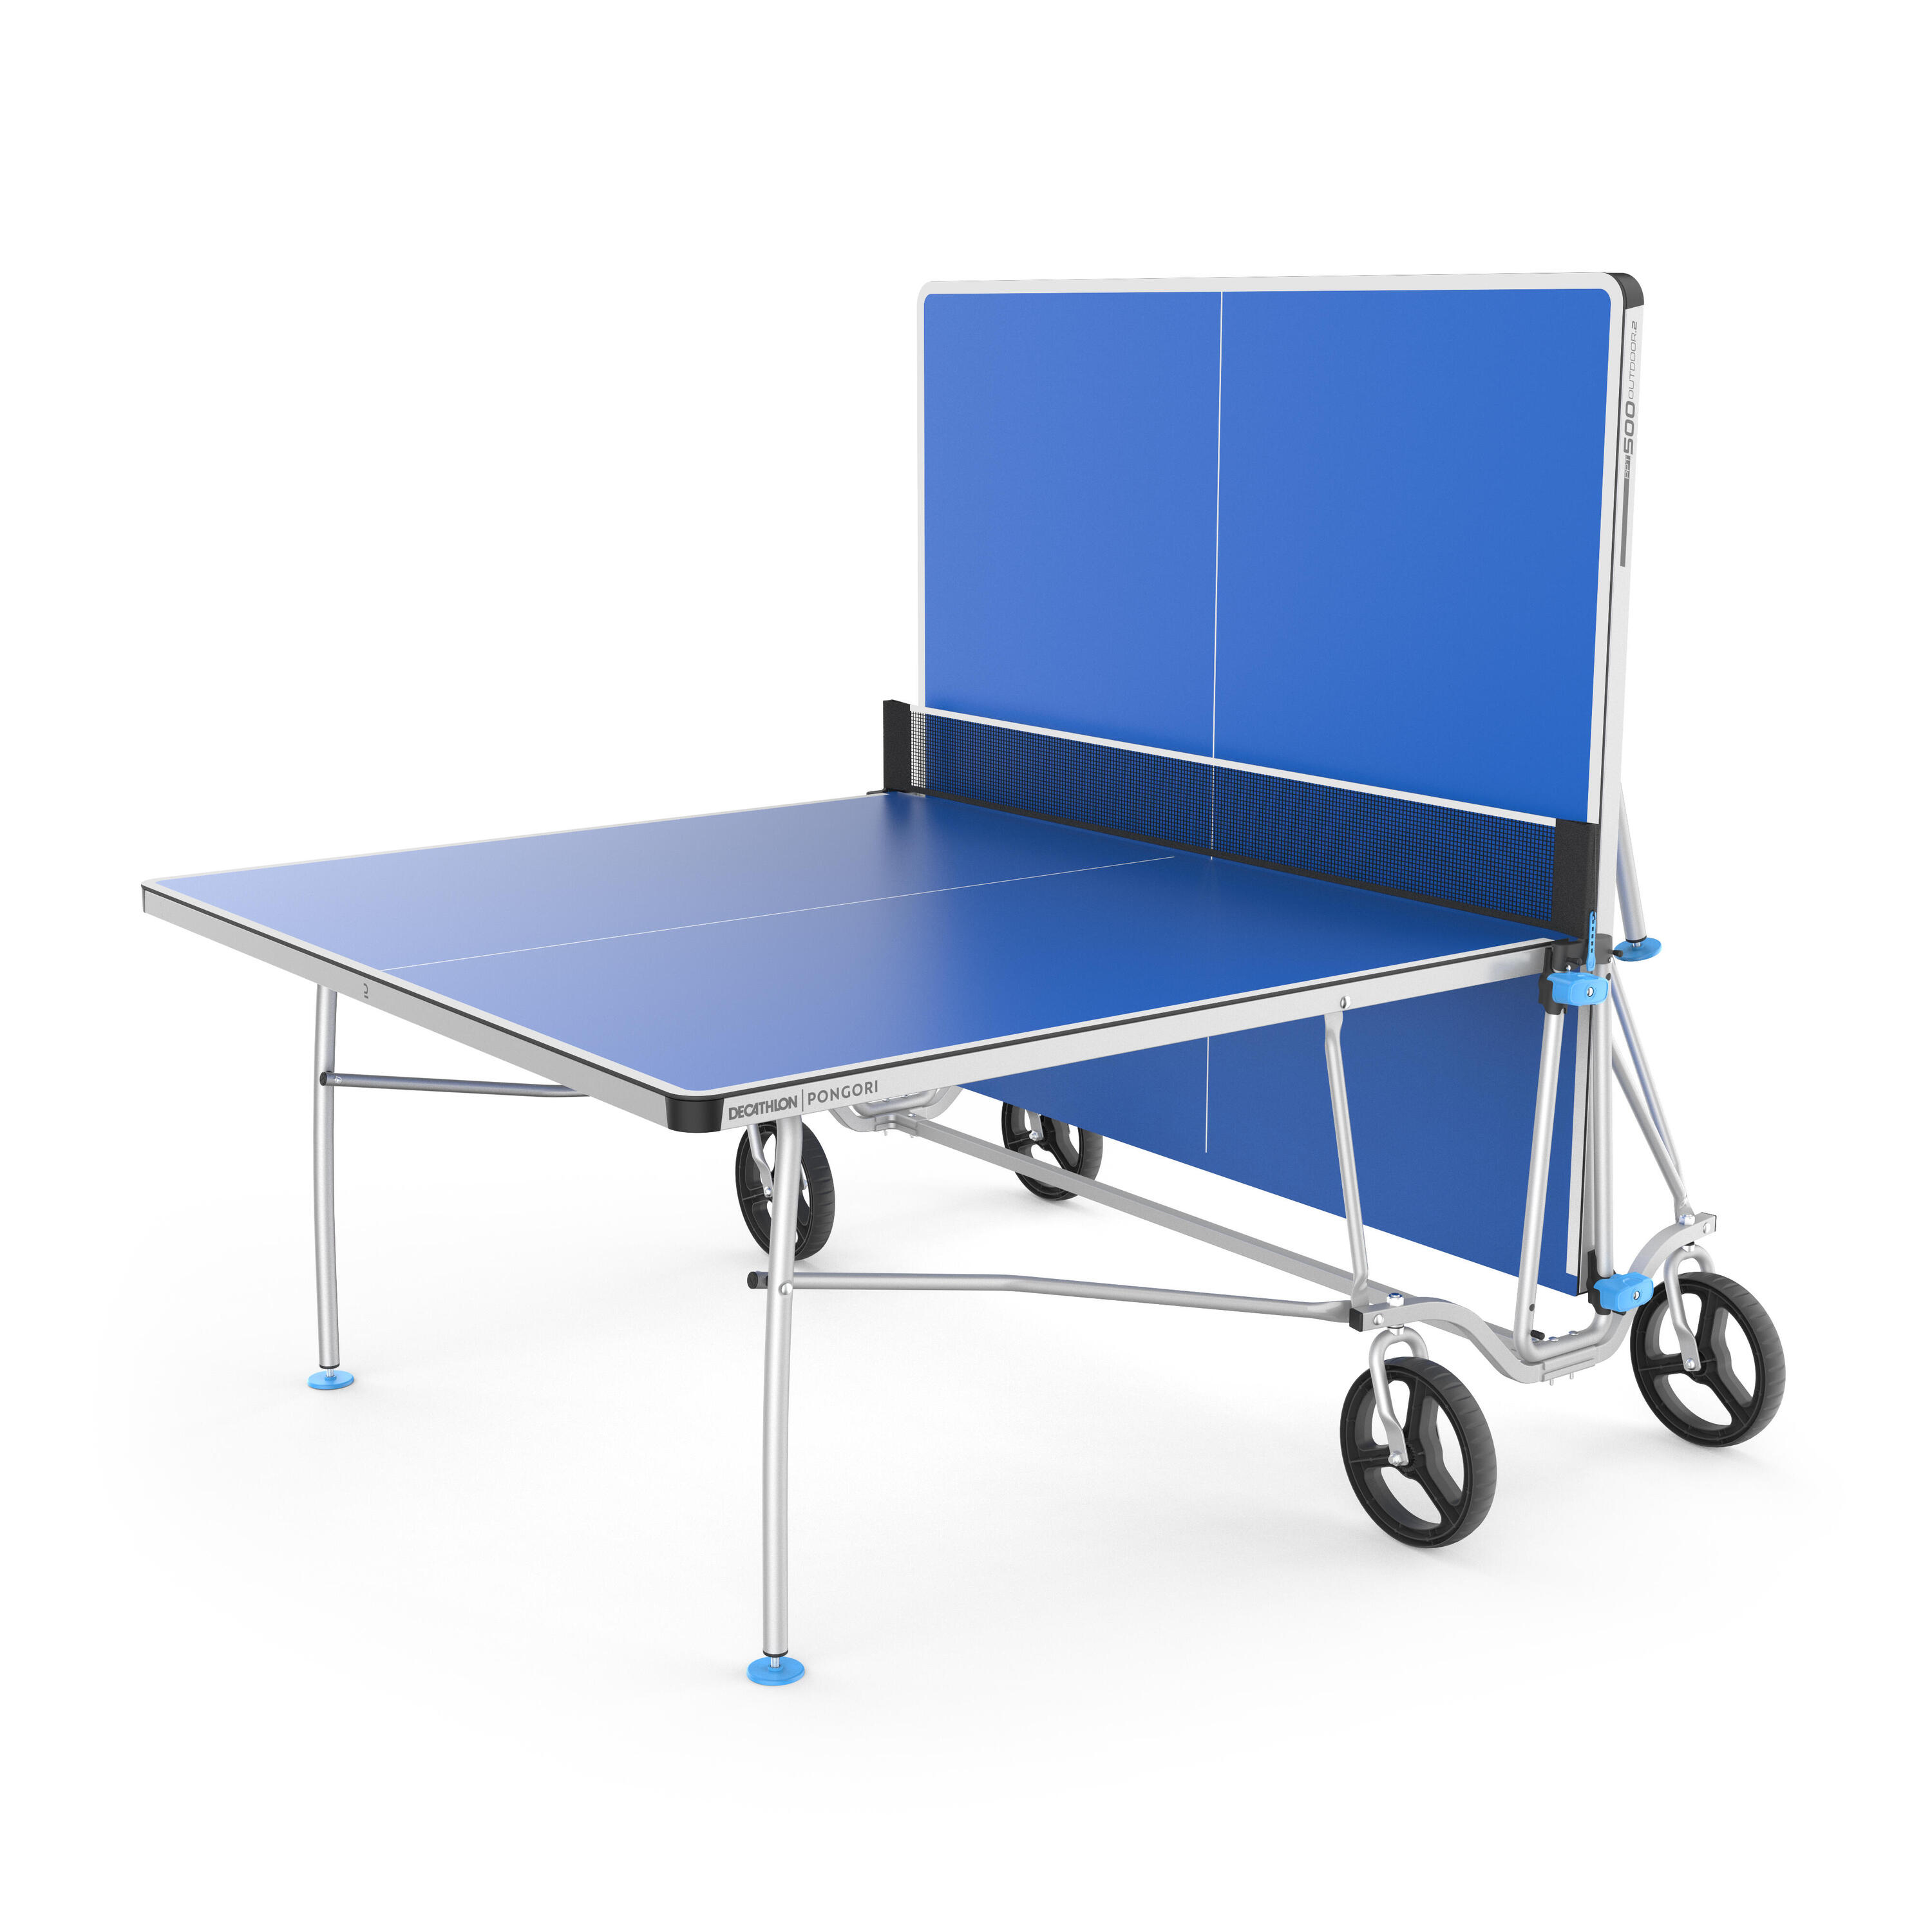 Outdoor Table Tennis Table PPT 500.2 - Blue 2/14